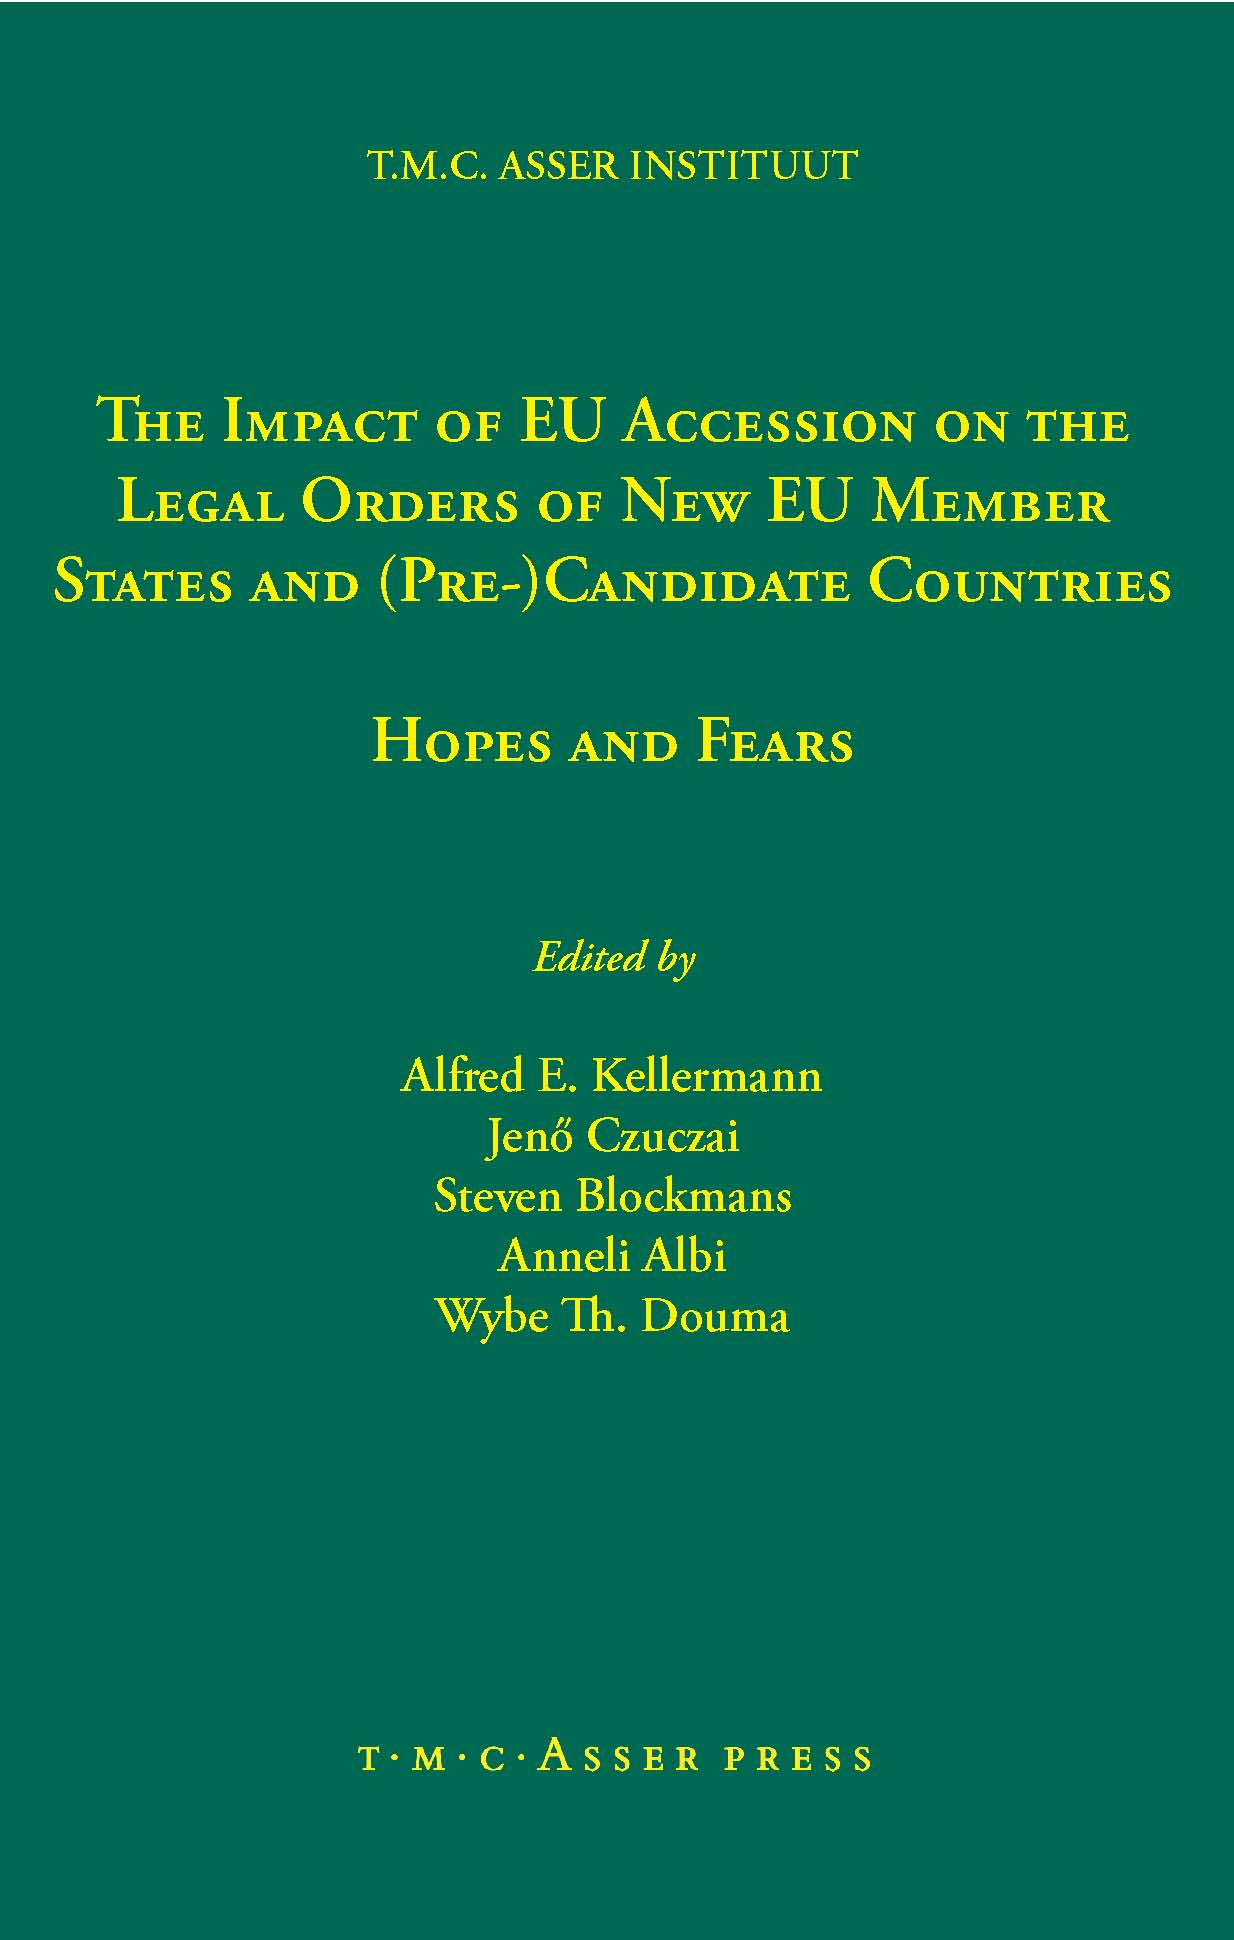 The Impact of EU Accession on the Legal Orders of New EU Member States and (Pre-) Candidate Countries - Hopes and Fears